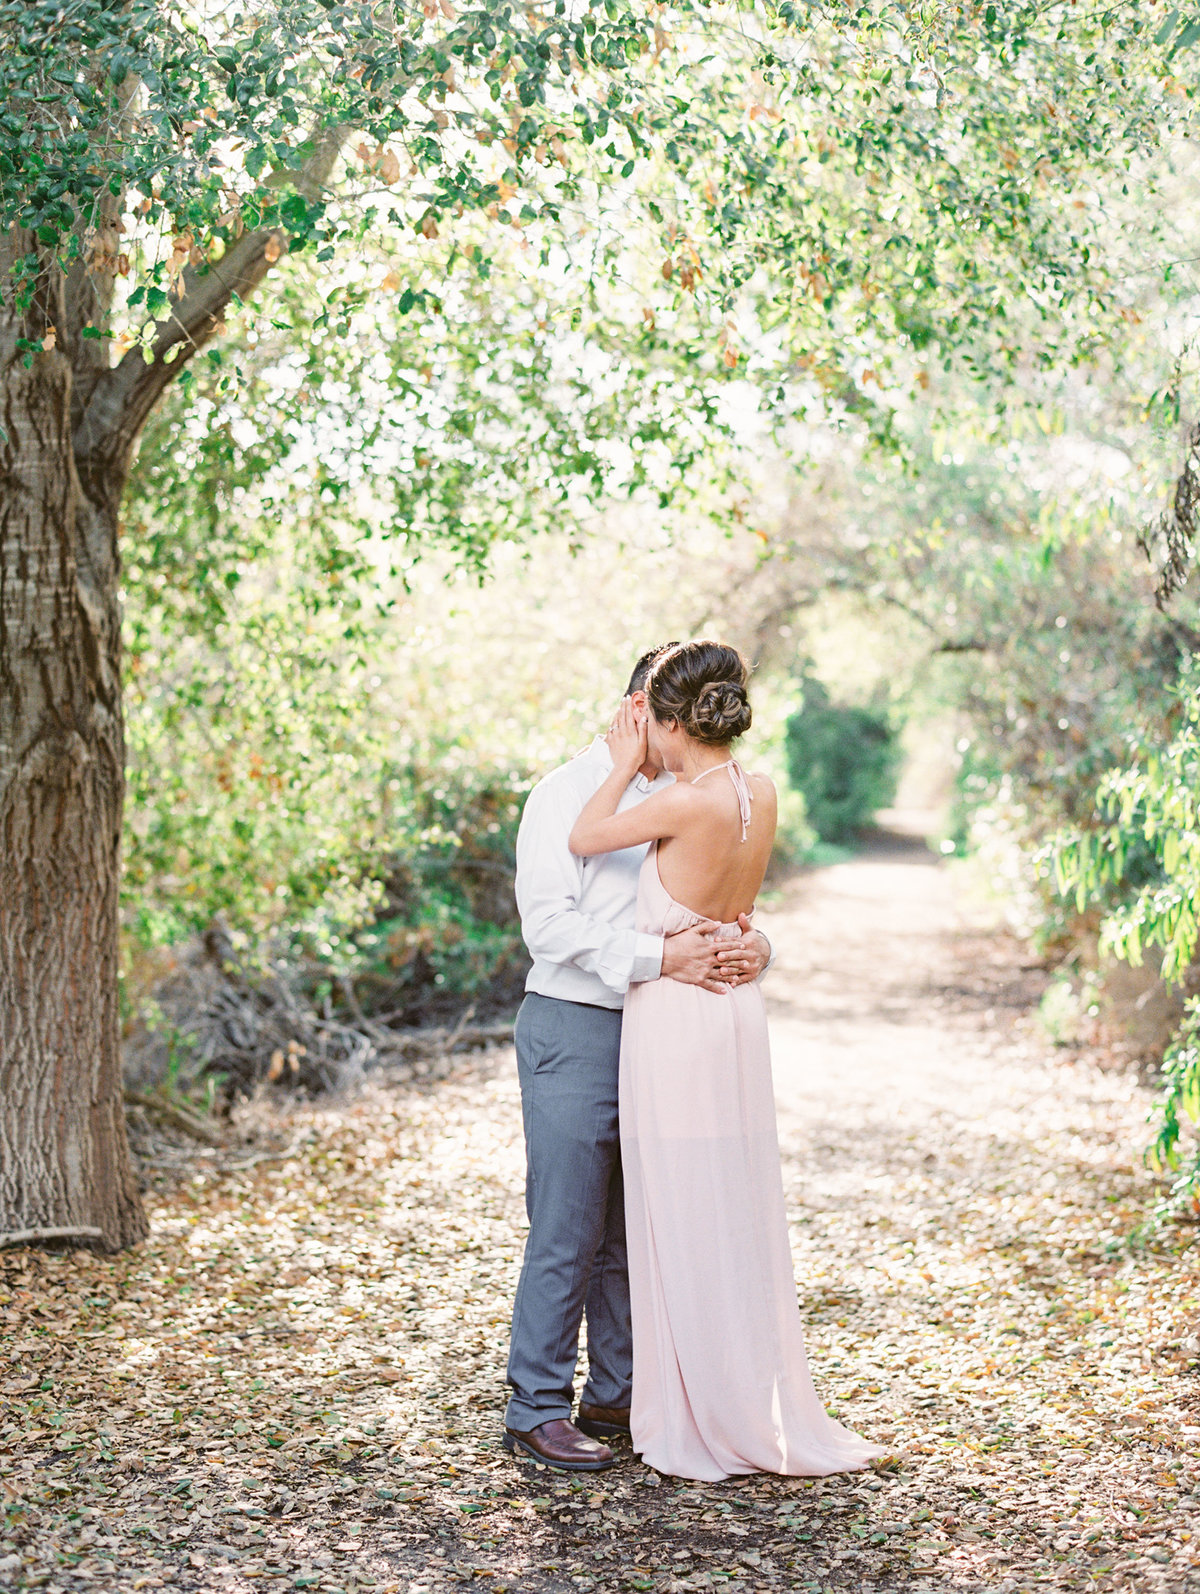 Babsie-Ly-Photography-Film-Engagement-at-the-park-nature-Orange-County-San-Diego-Stephanie-Tony-002